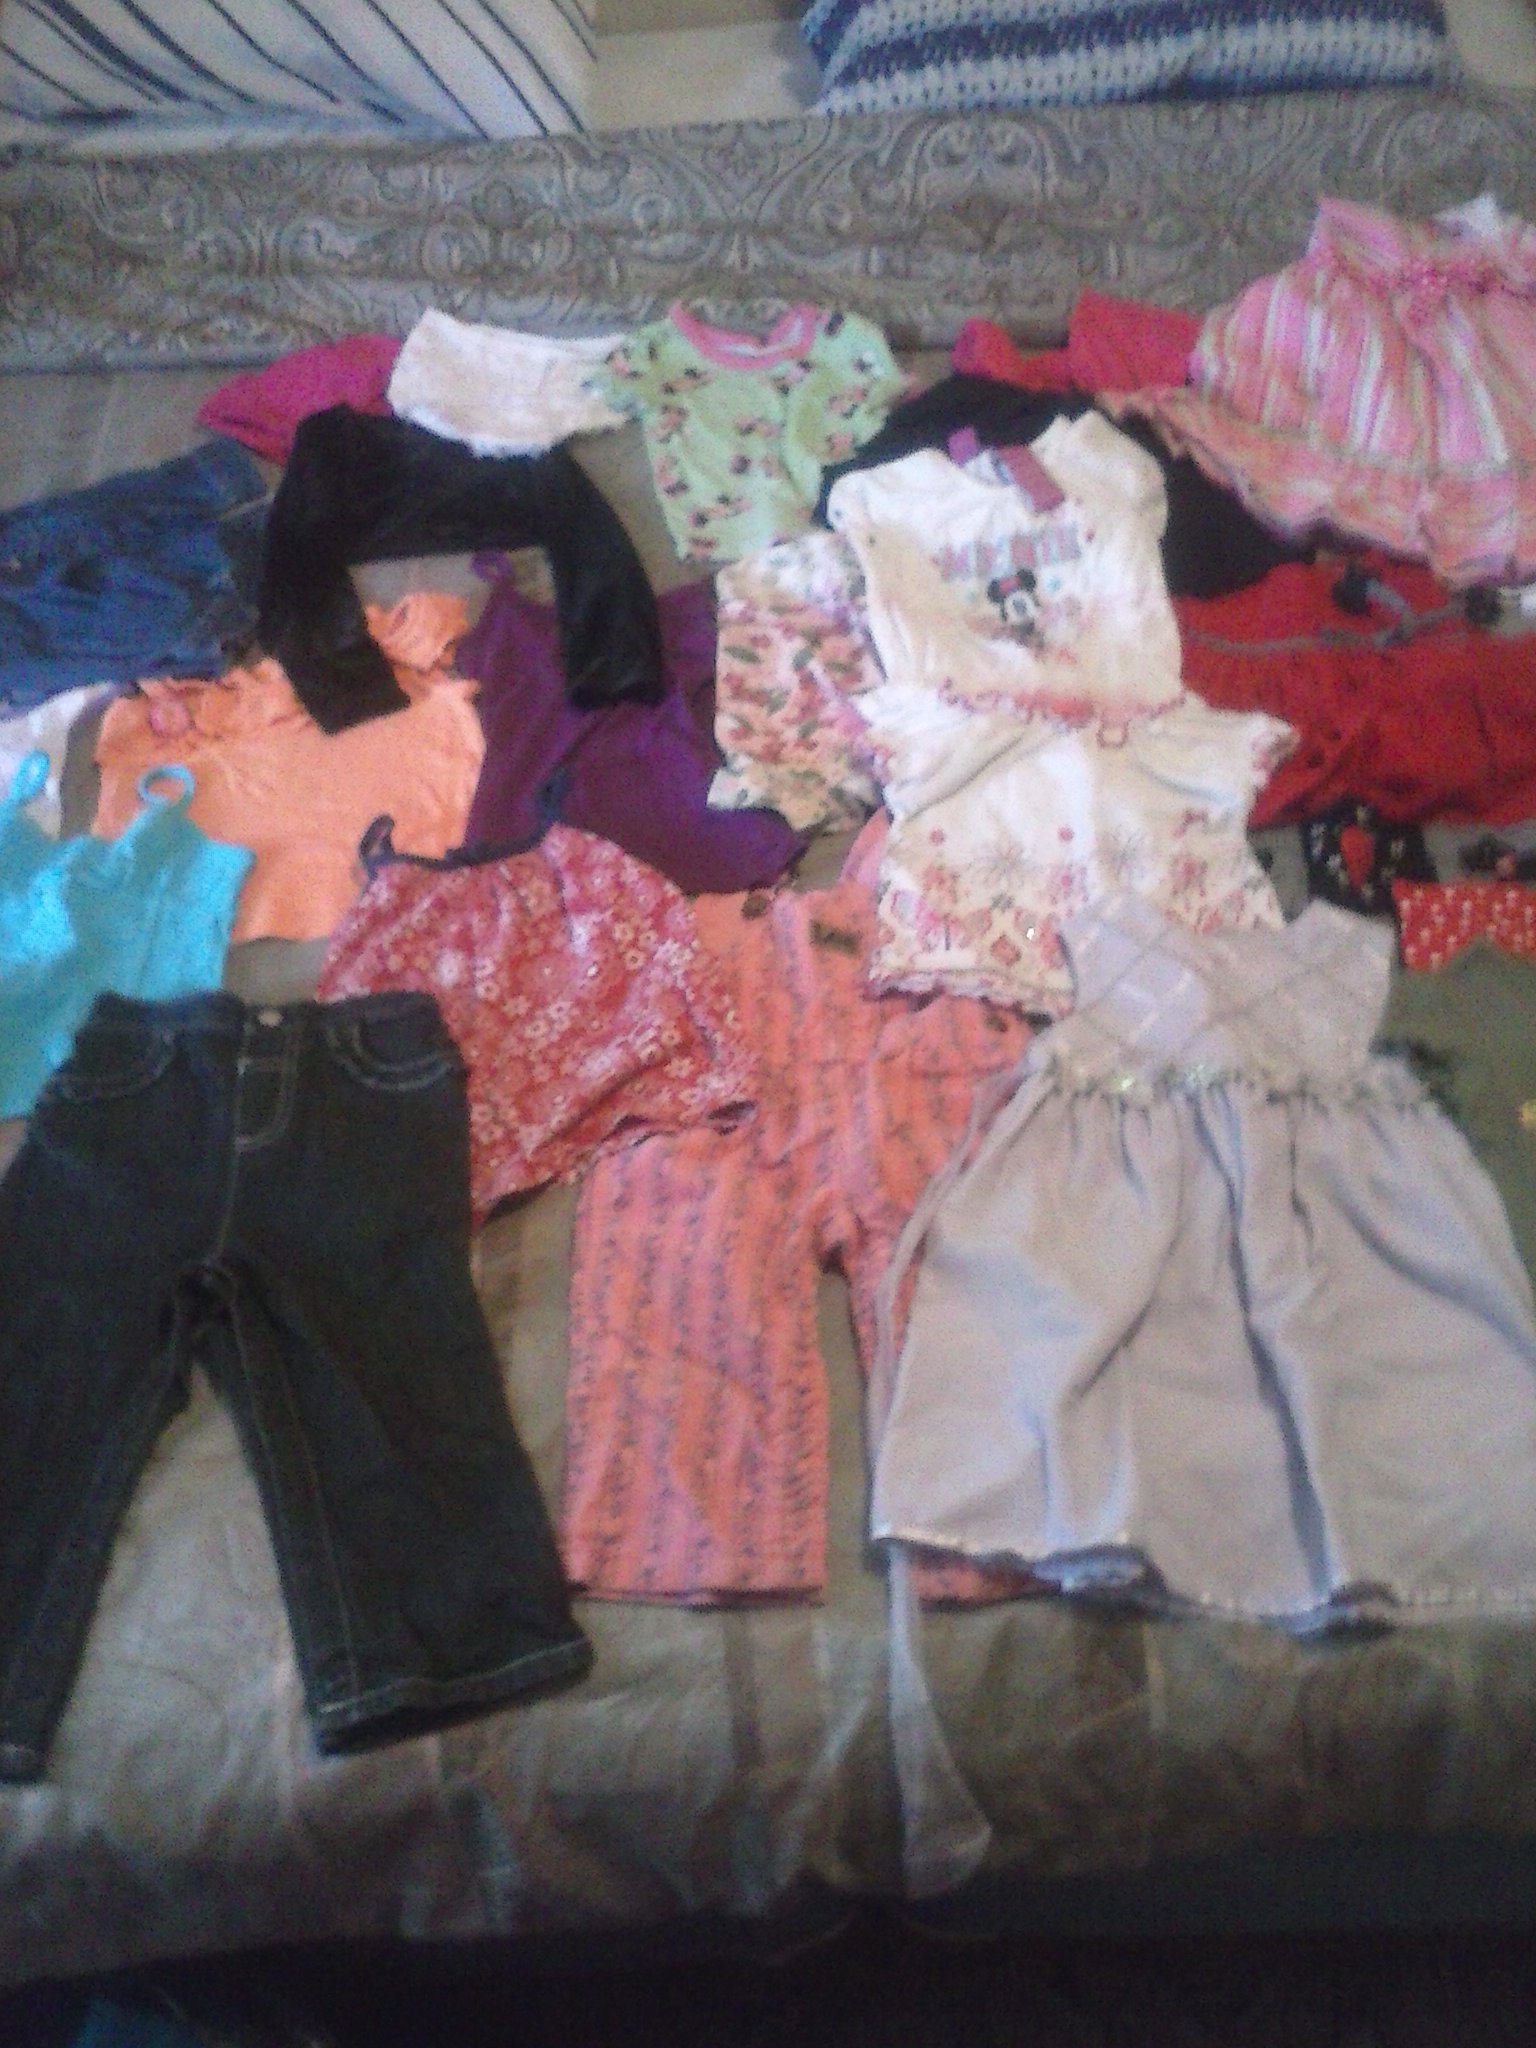 various little girl clothes sizes 18 months to 3T large bag full